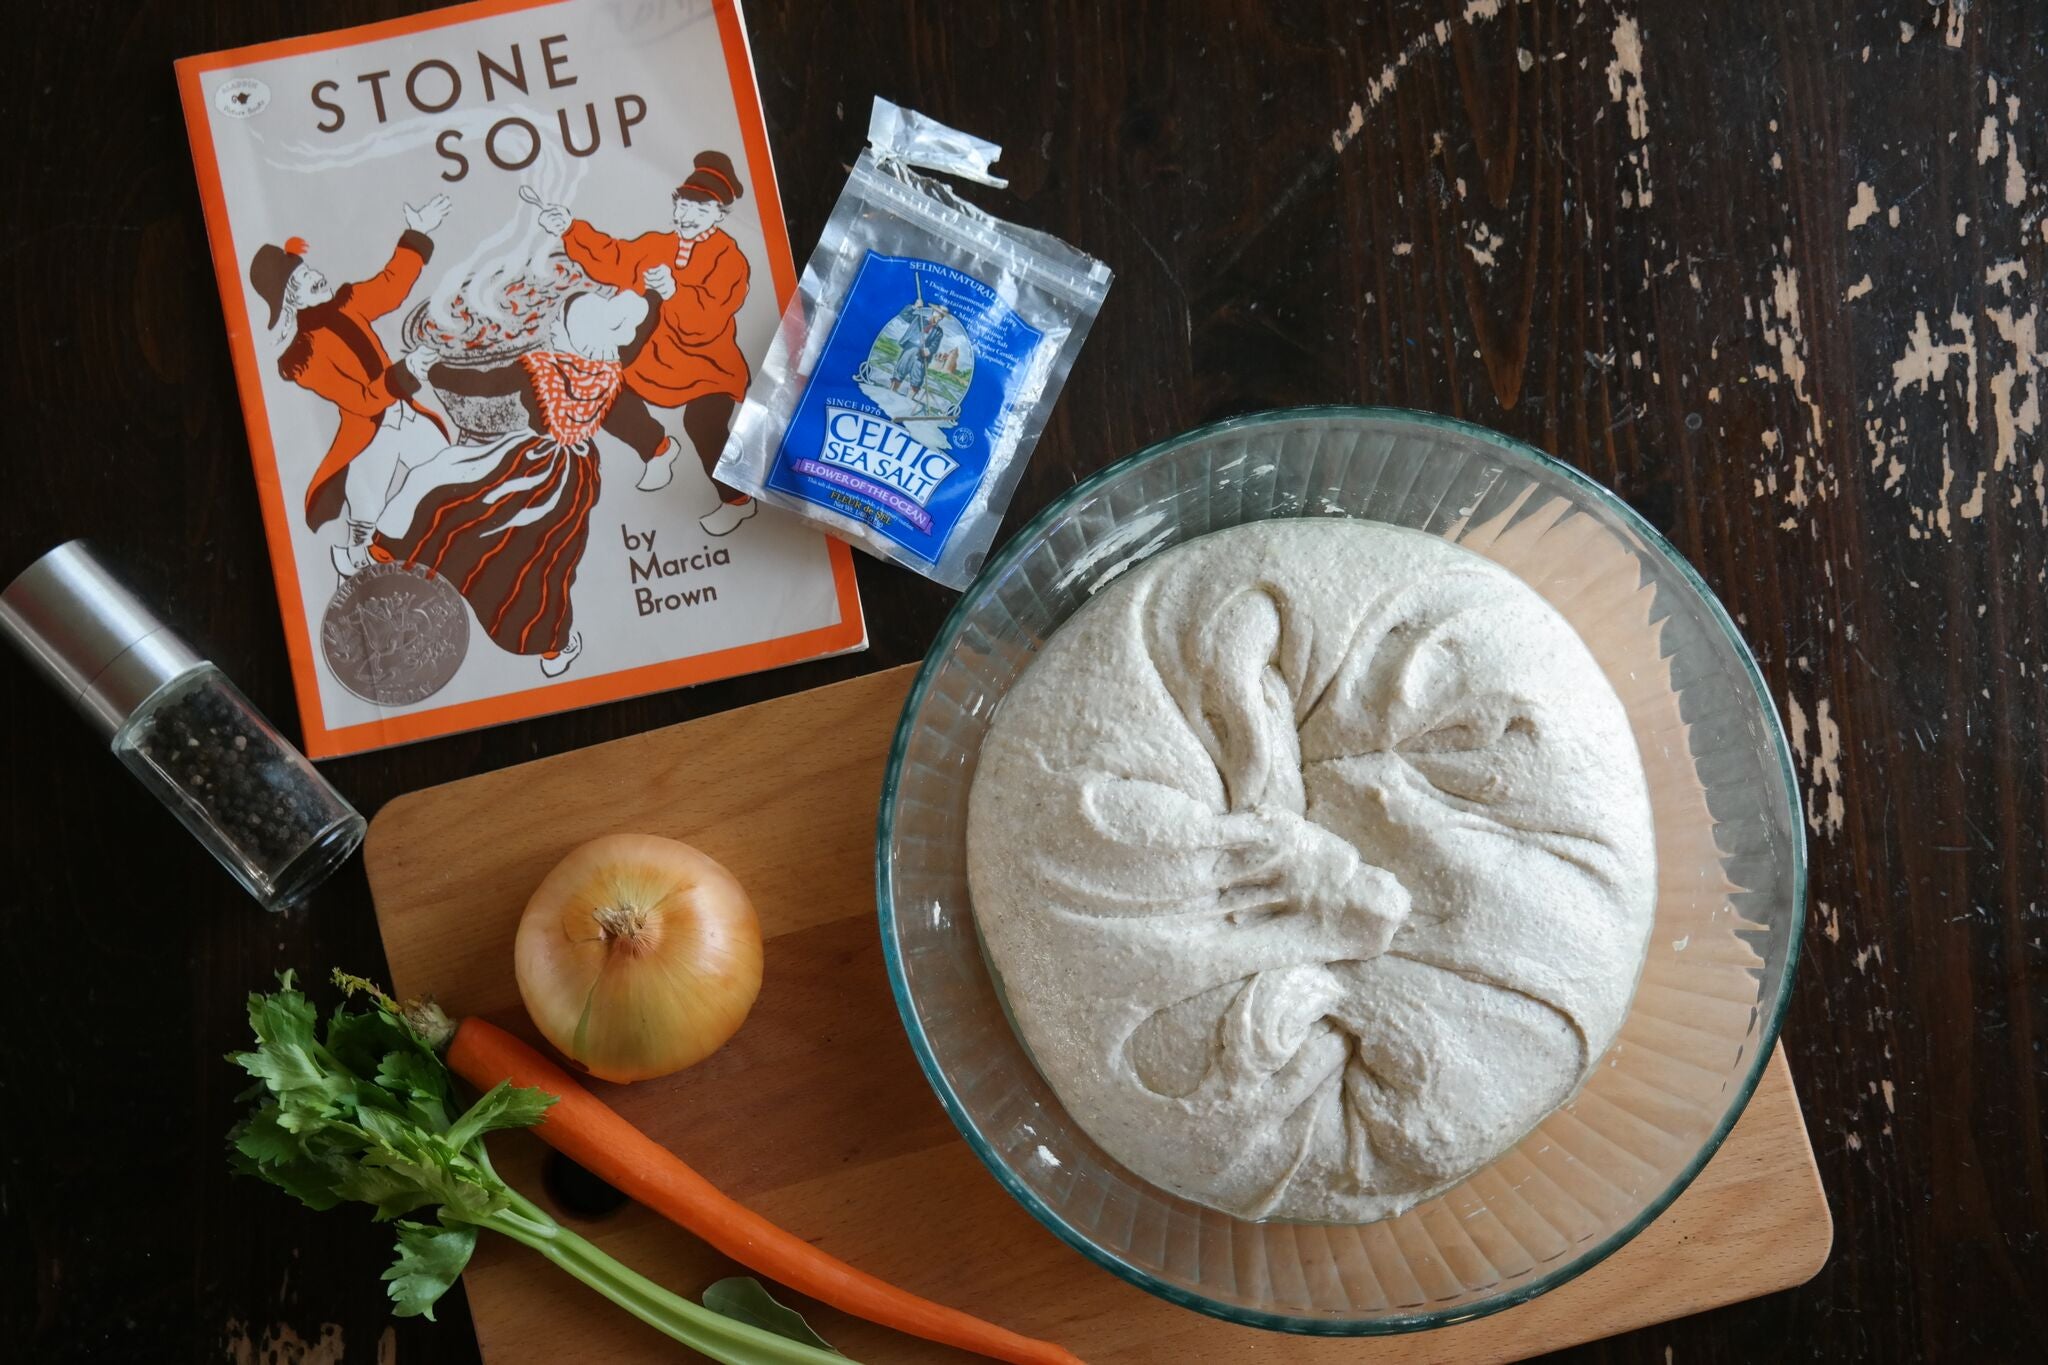 The book "Stone Soup" on a well worn wooden table next to a bowl of sour dough dough made by a homeschool family.